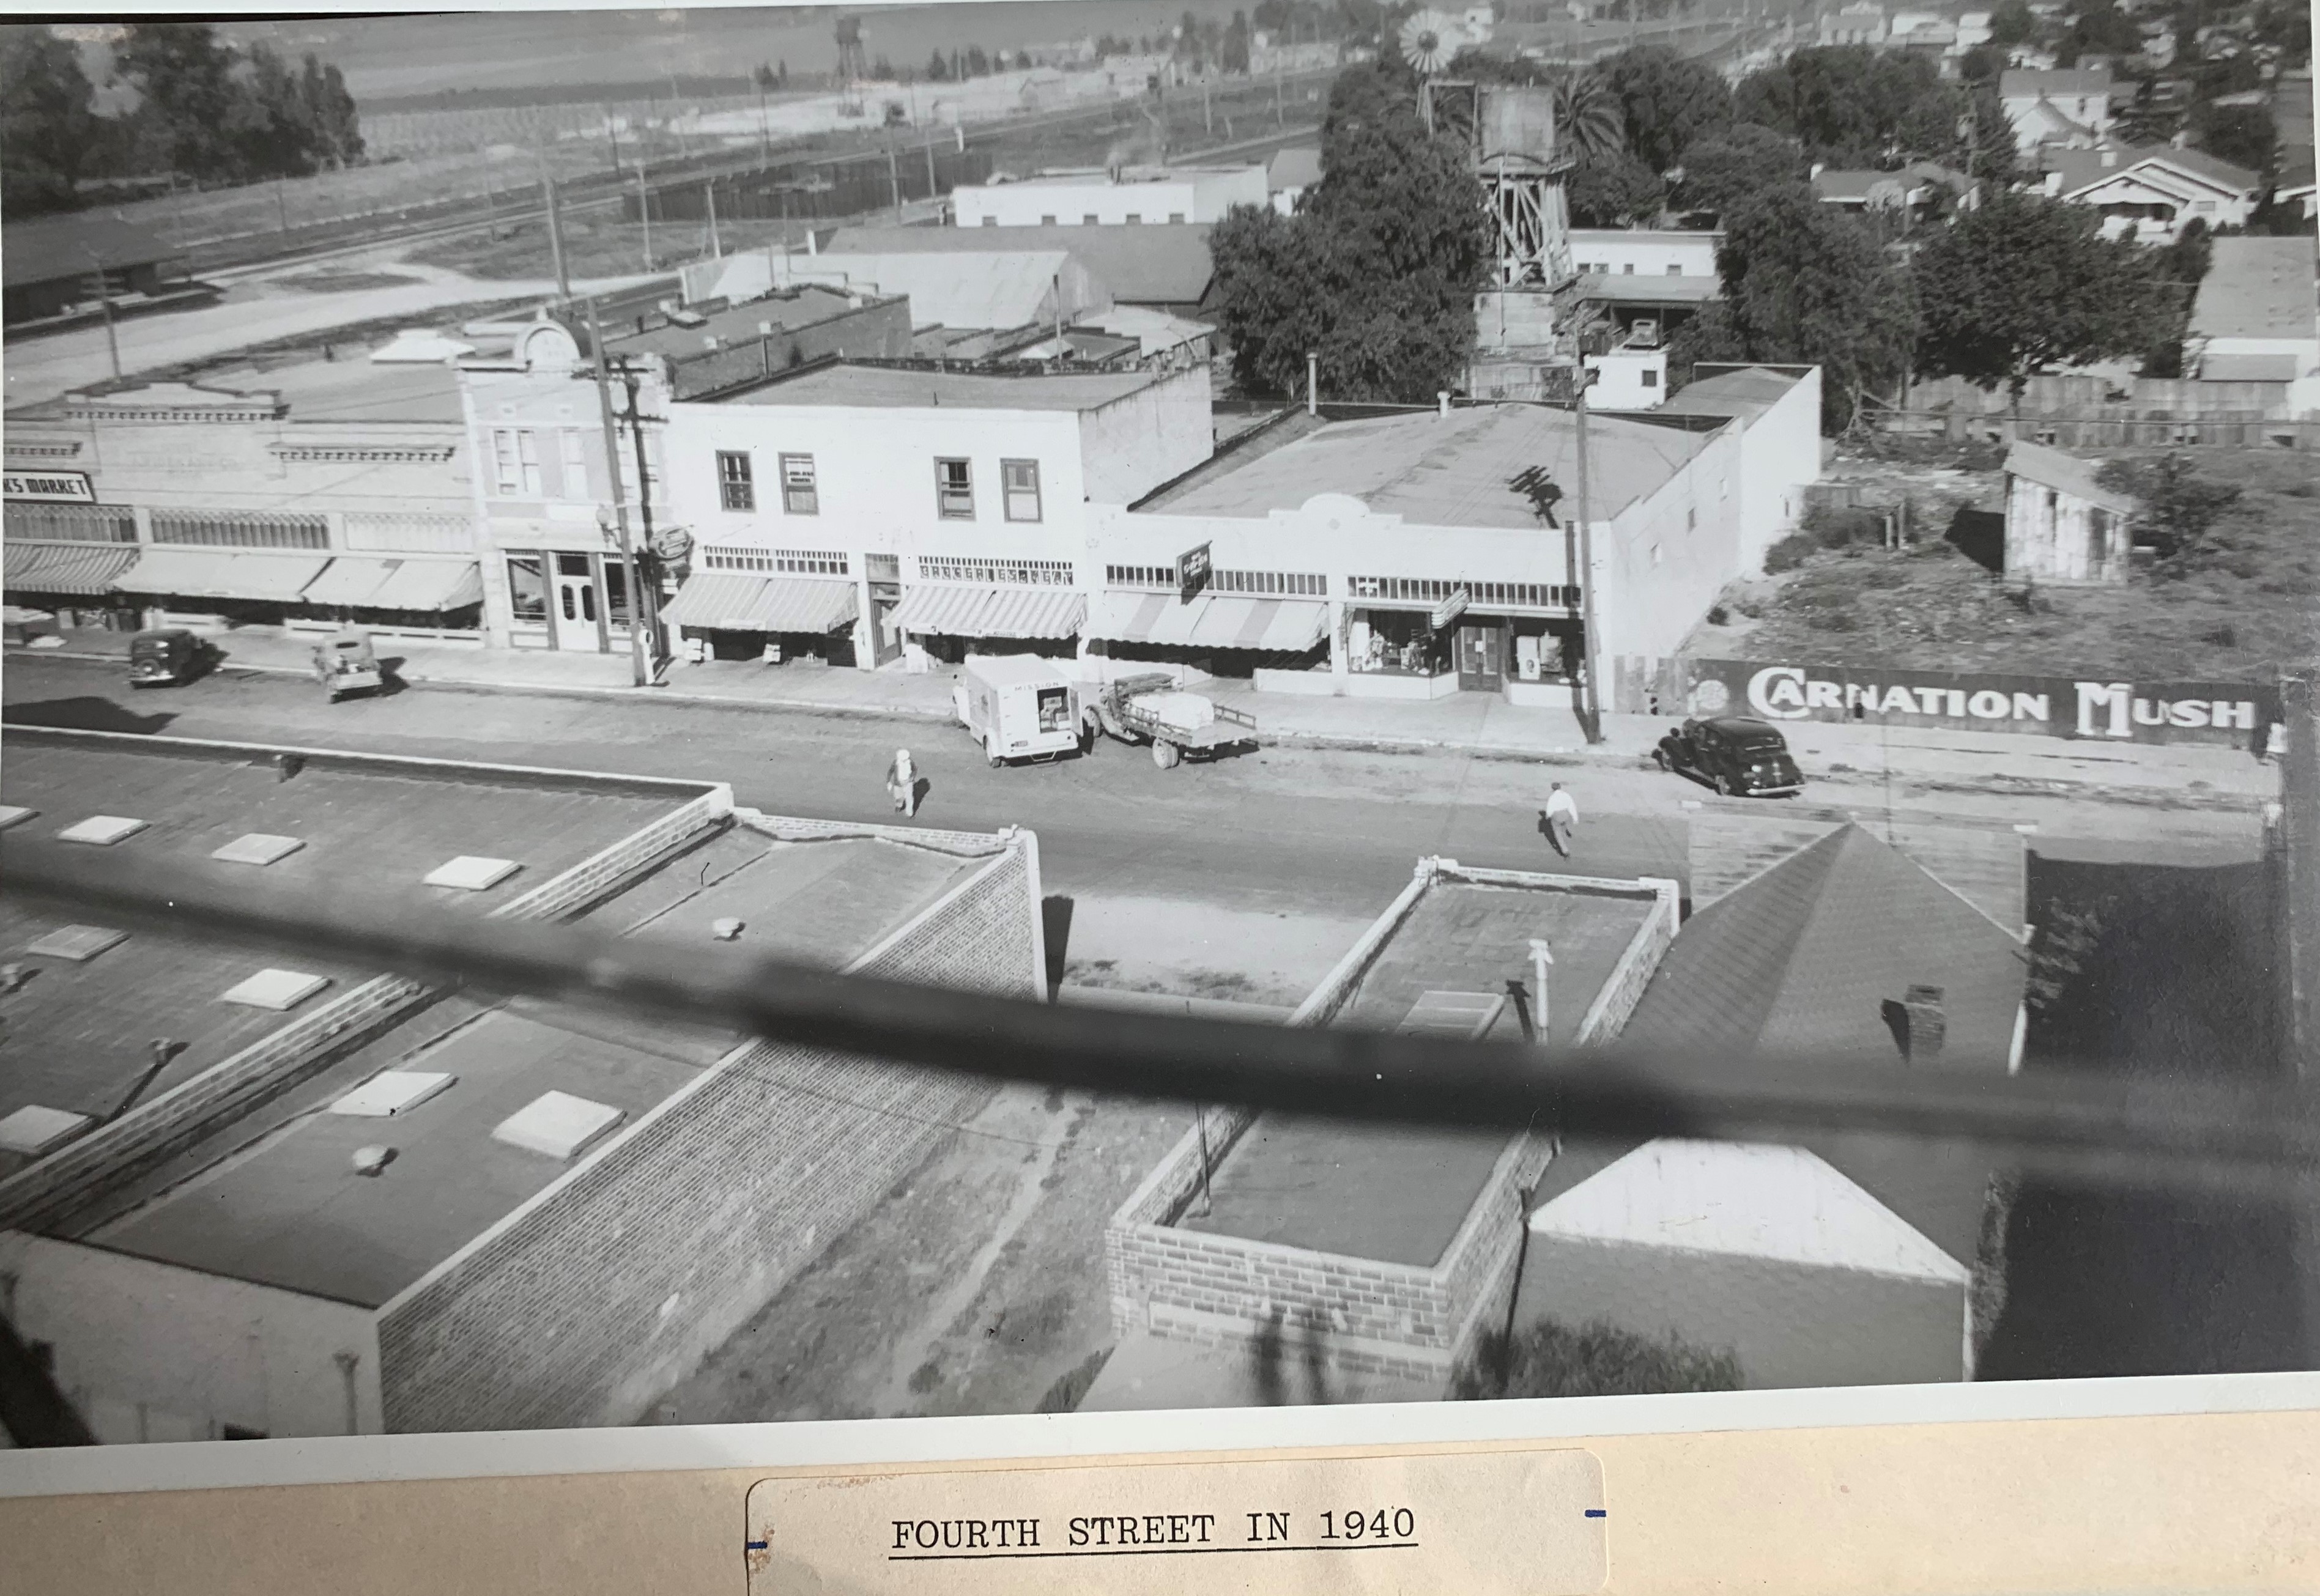 Pictue of Gonzales in 1940